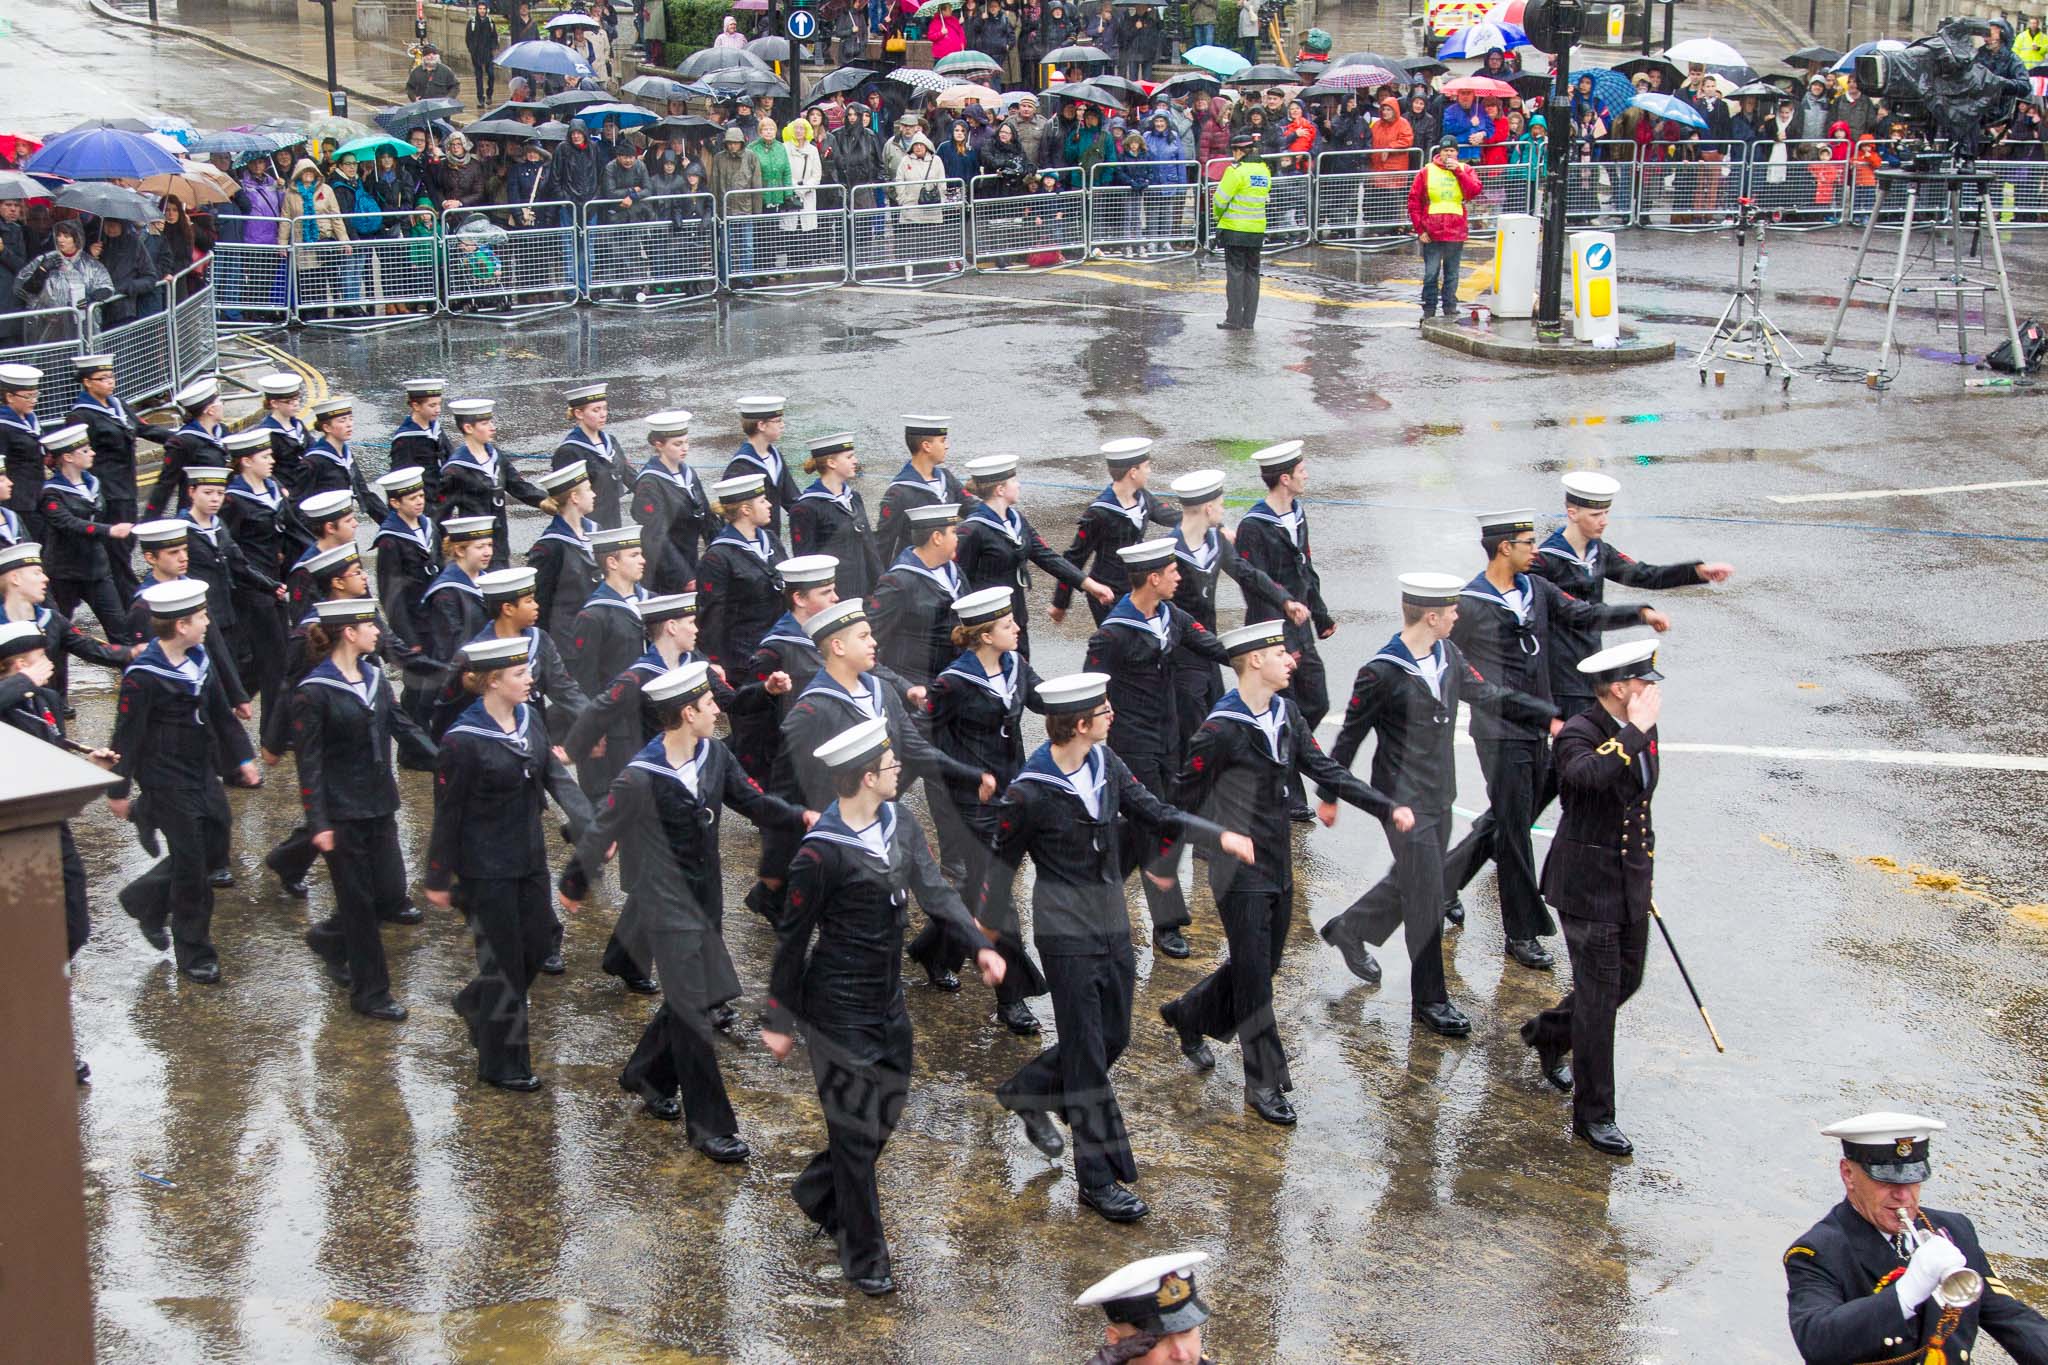 Lord Mayor's Show 2013: 101-London Area Sea Cadet Band-more than 100 Sea Cadets from 16 units across London are taking part in the parade this year..
Press stand opposite Mansion House, City of London,
London,
Greater London,
United Kingdom,
on 09 November 2013 at 11:54, image #1200